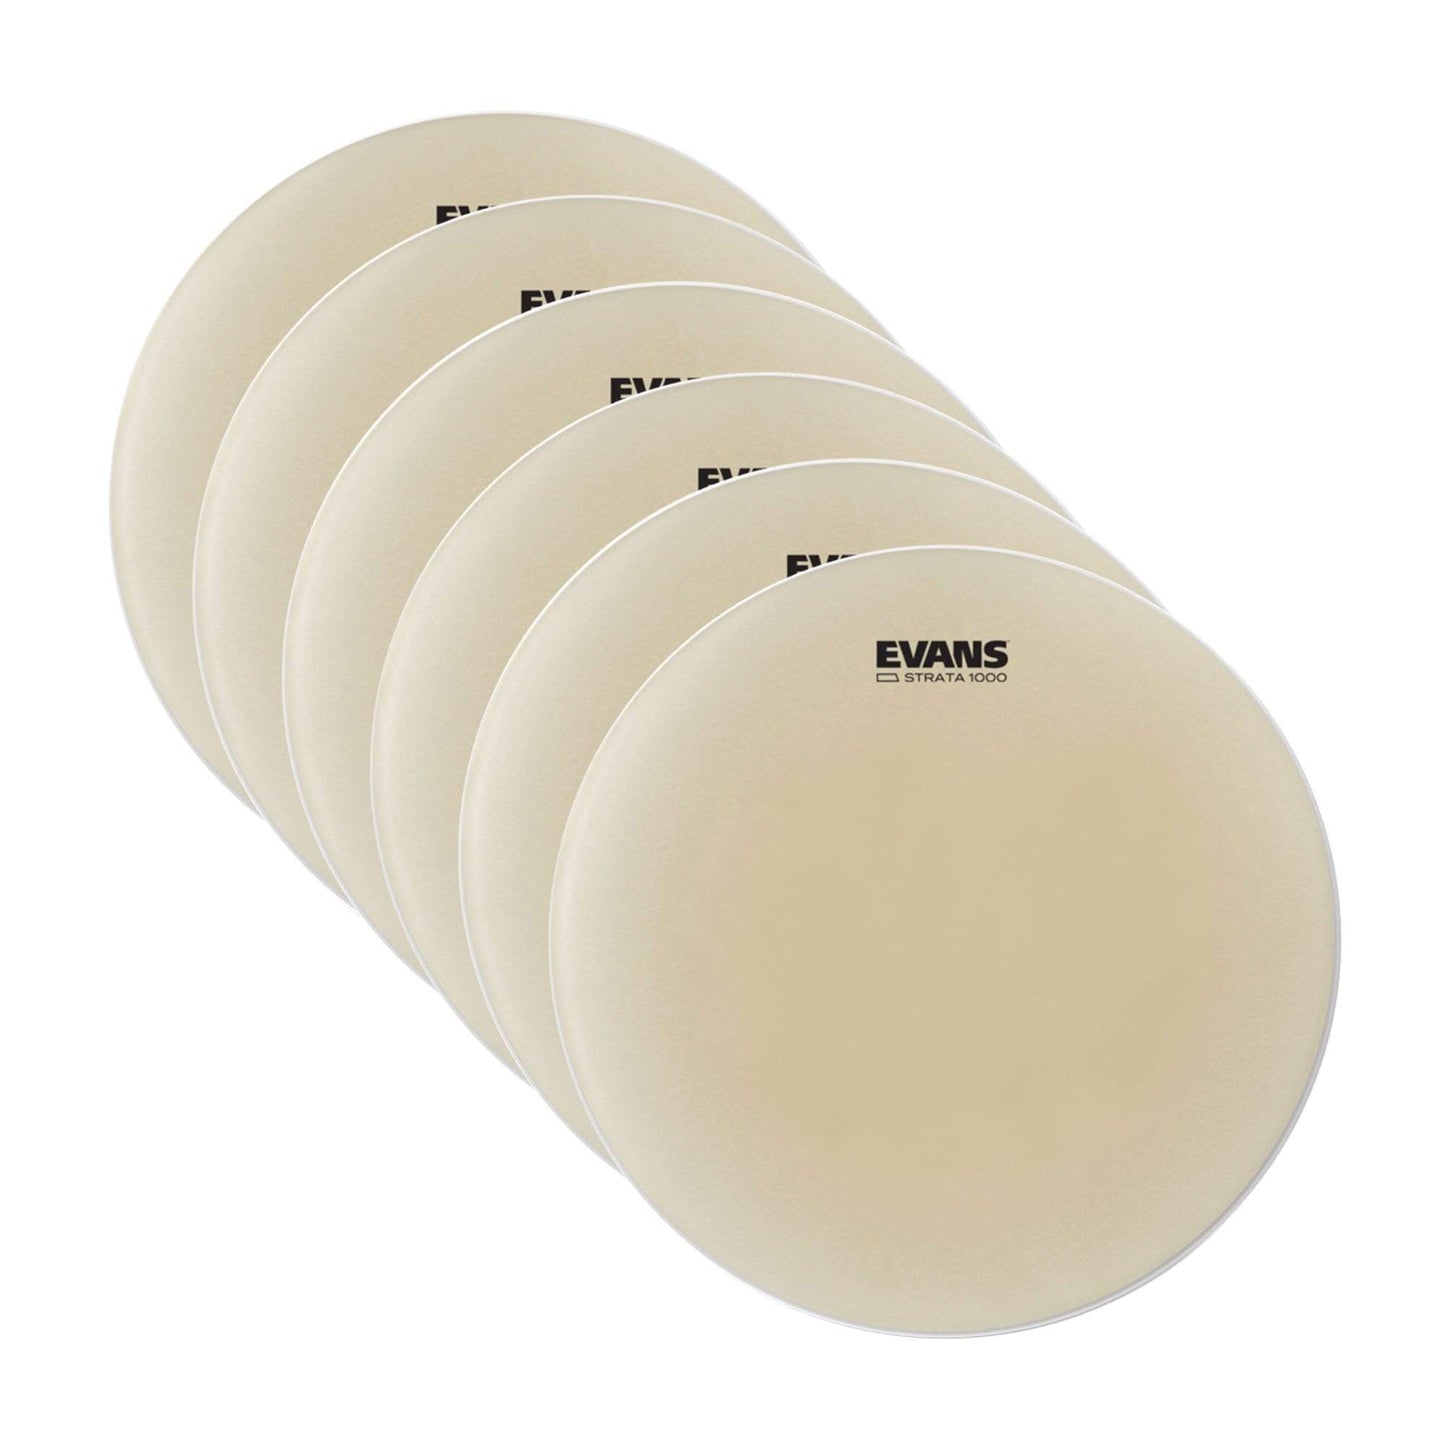 Evans 14" Strata 1000 Drum Head (6 Pack Bundle) Drums and Percussion / Parts and Accessories / Heads